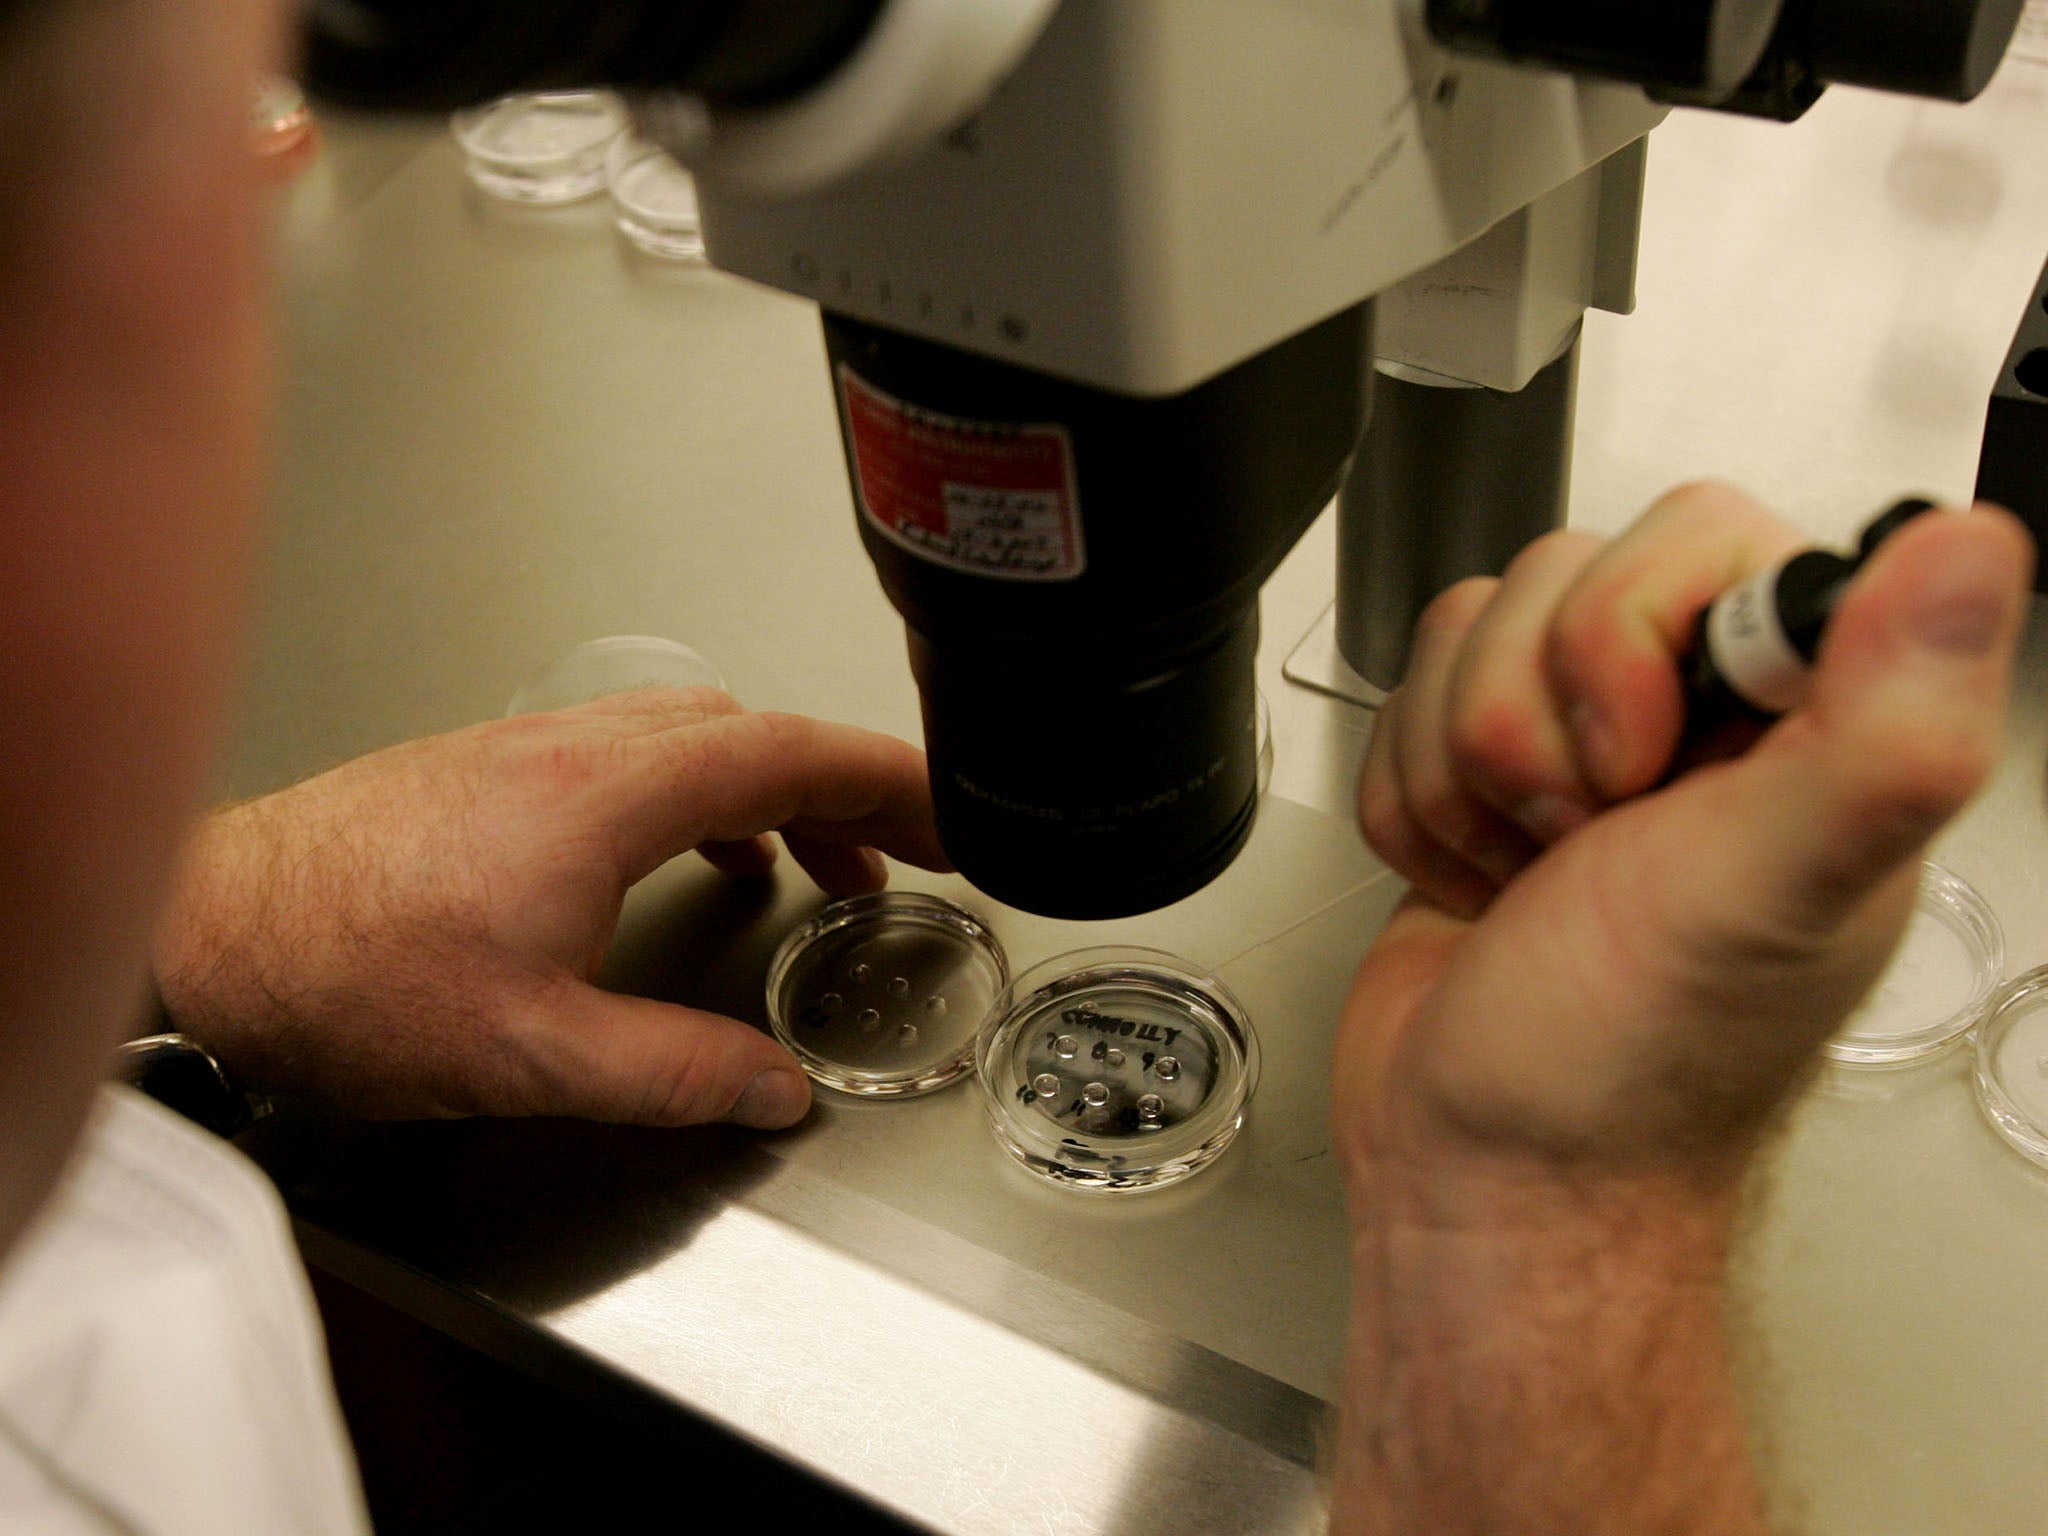 Genetically modified embryos are a divisive issue among scientists